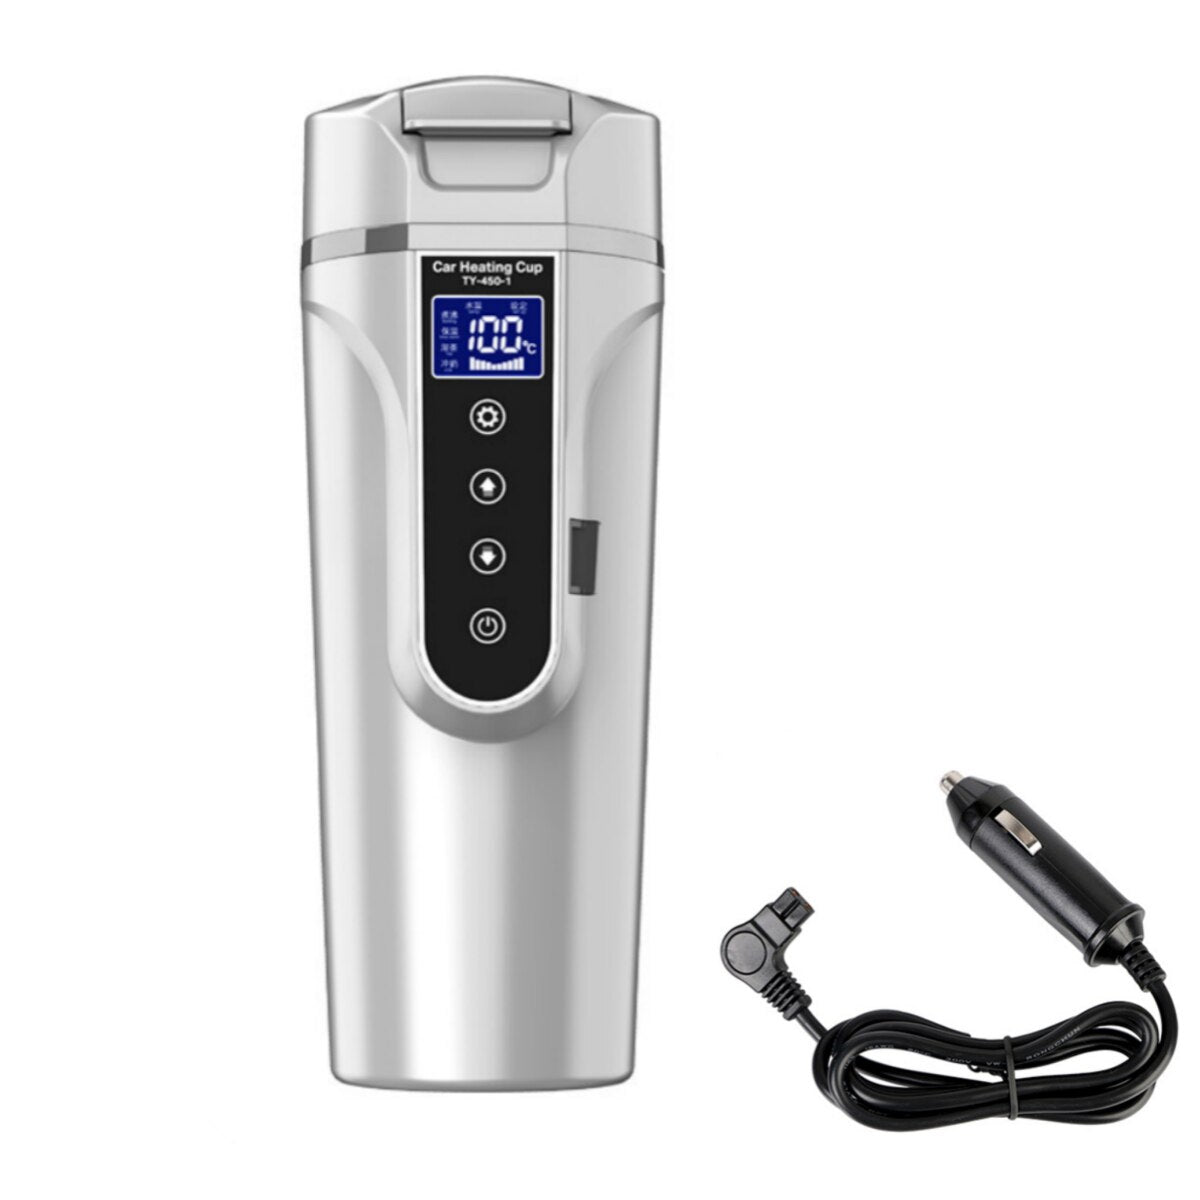 Digital Display Electric Water Heater Thermos White cup